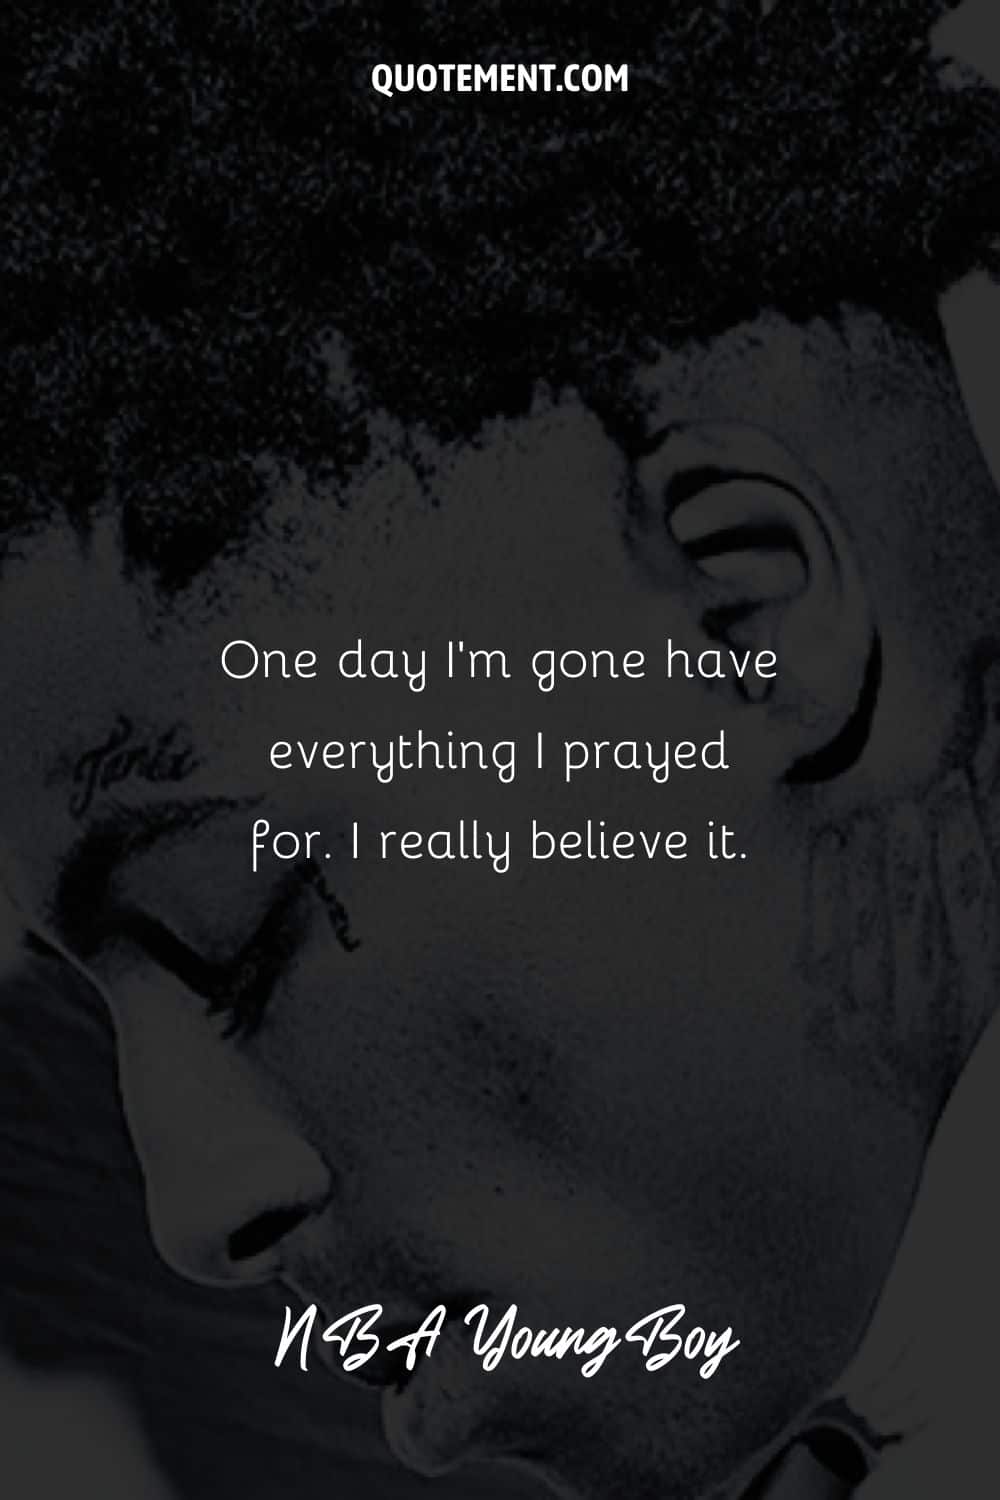 “One day I’m gone have everything I prayed for. I really believe it.” – NBA YoungBoy